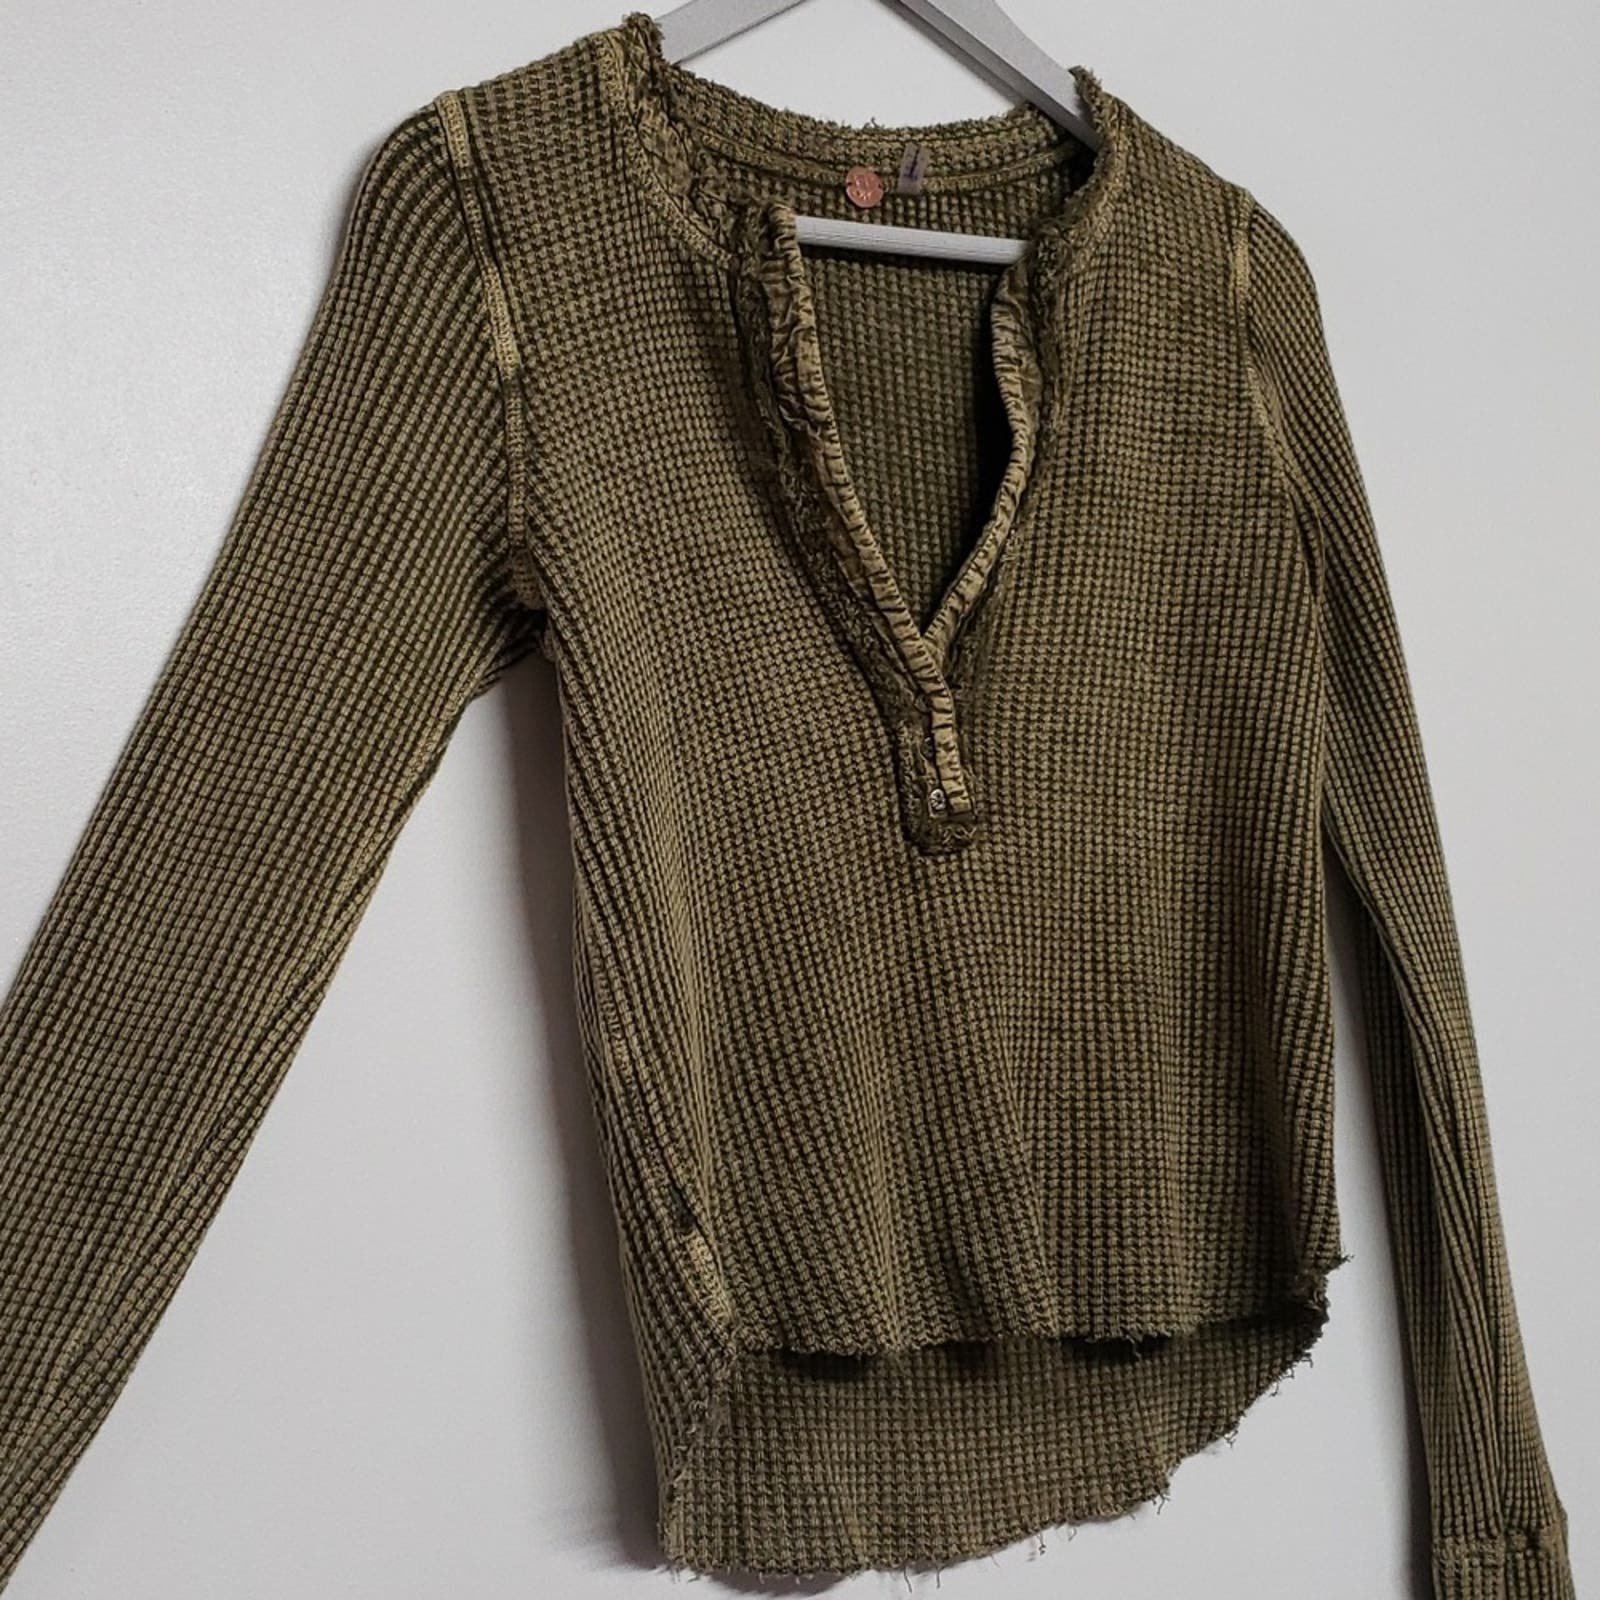 cheapest place to buy  Free People One Colt Thermal Top Women´s Size XS Army Green kFr4OsecY online store